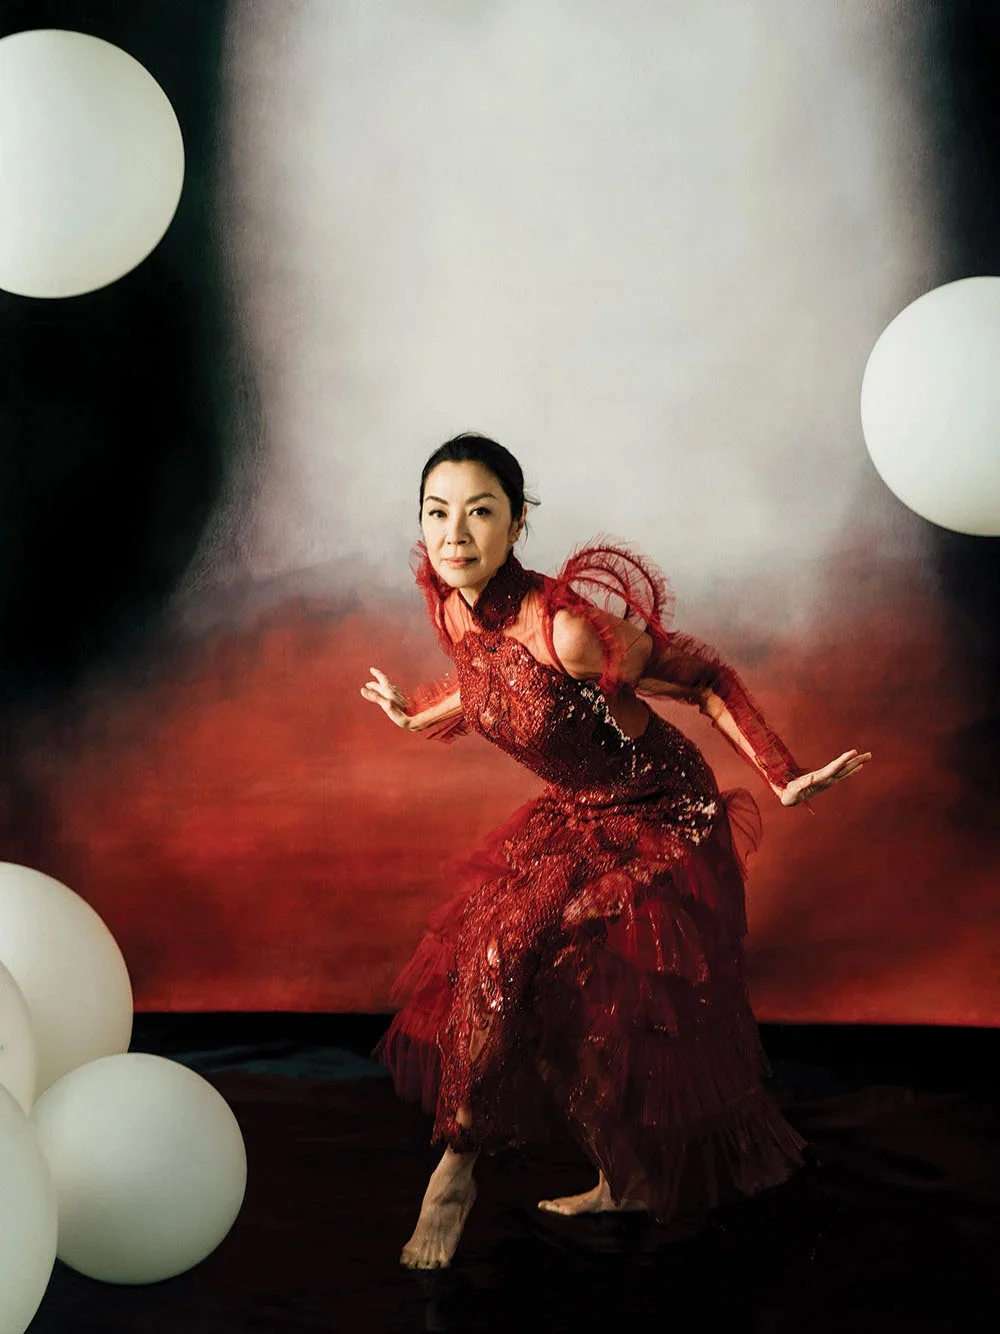 Michelle Yeoh, "The Hollywood Reporter" new photo ​​​